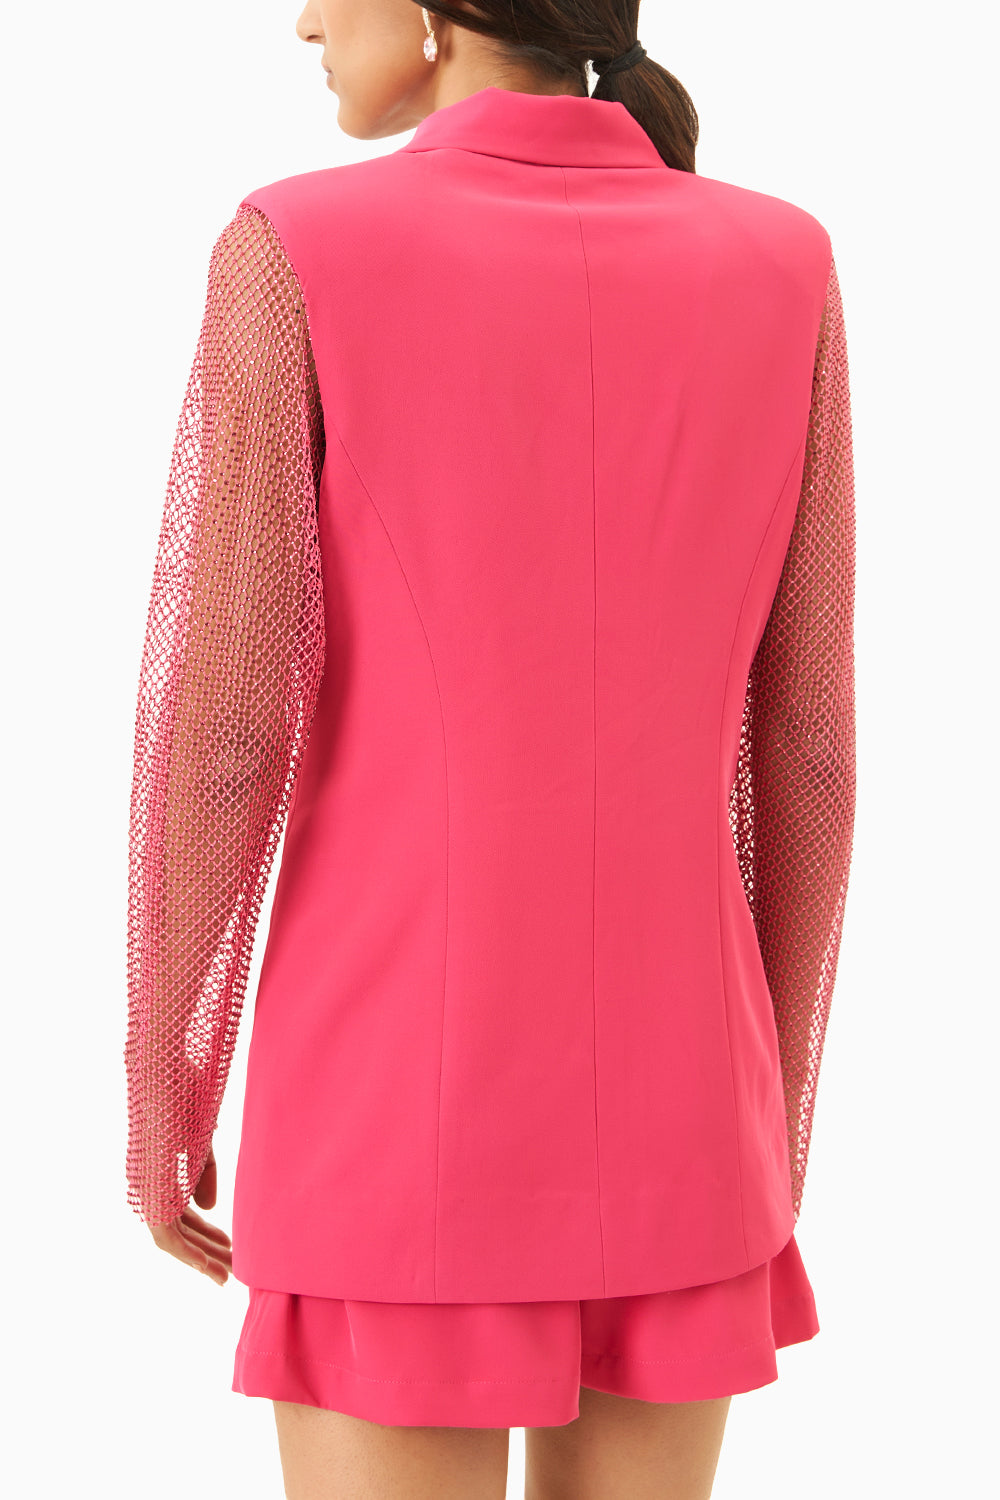 Pink Mesh Blazer with Crystals Co-ord Set